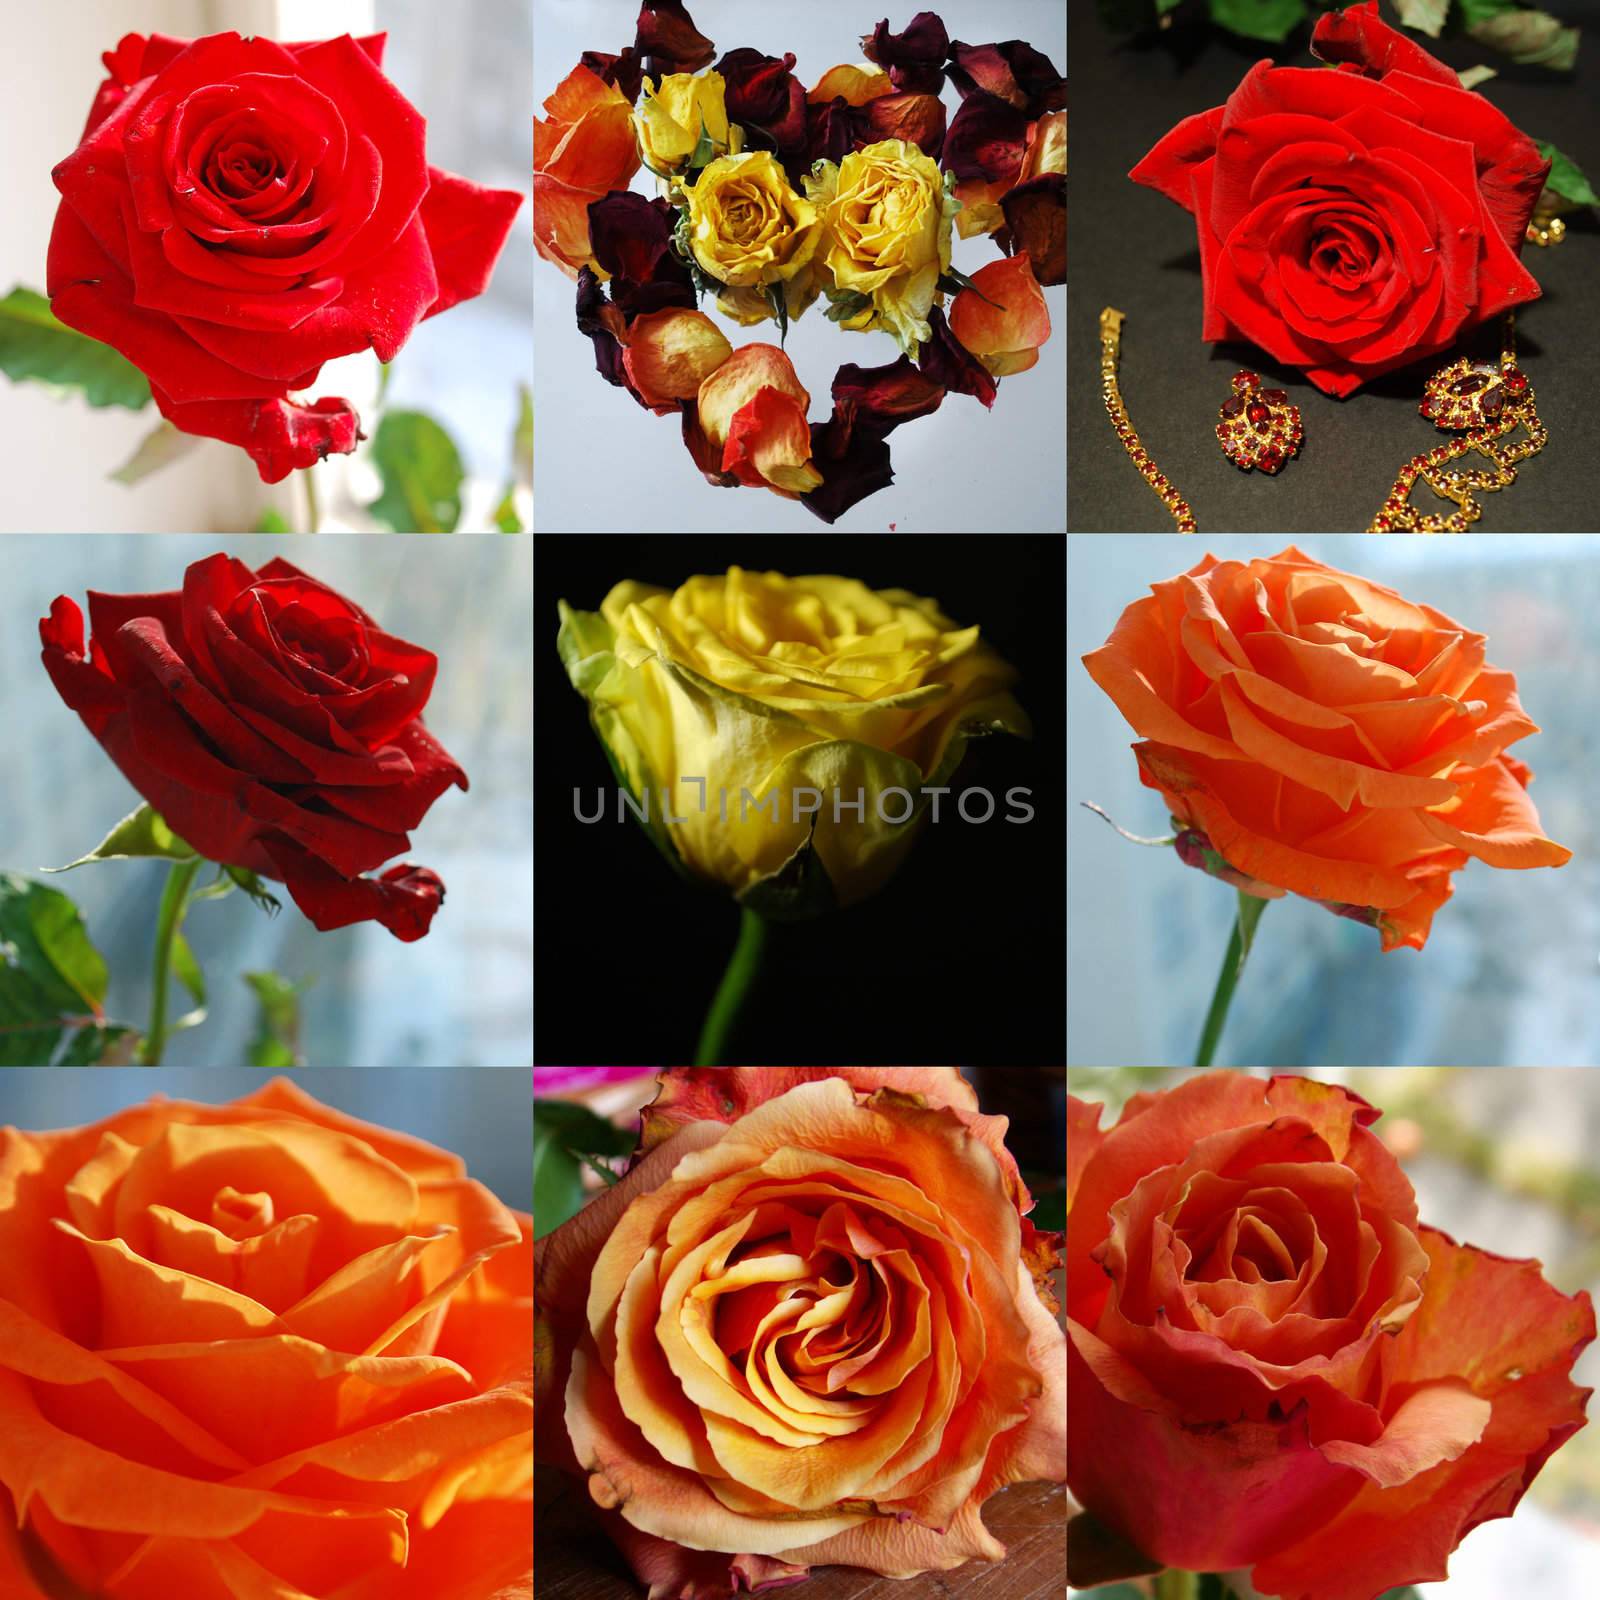 roses collection by sarkao